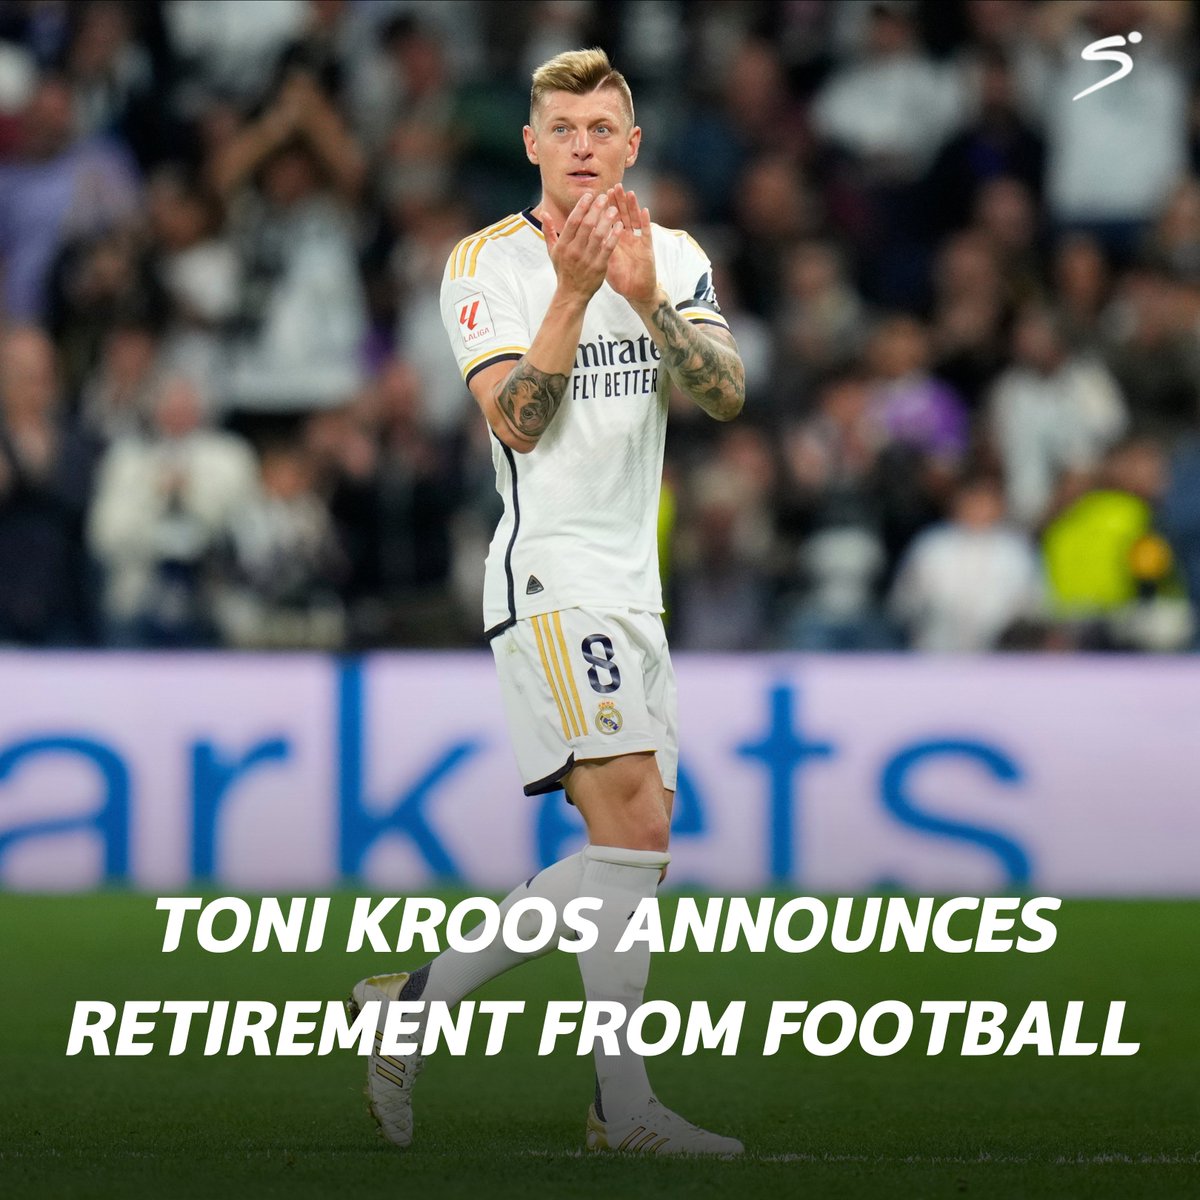 Toni Kroos has announced that he will retire from professional football after EURO 2024.